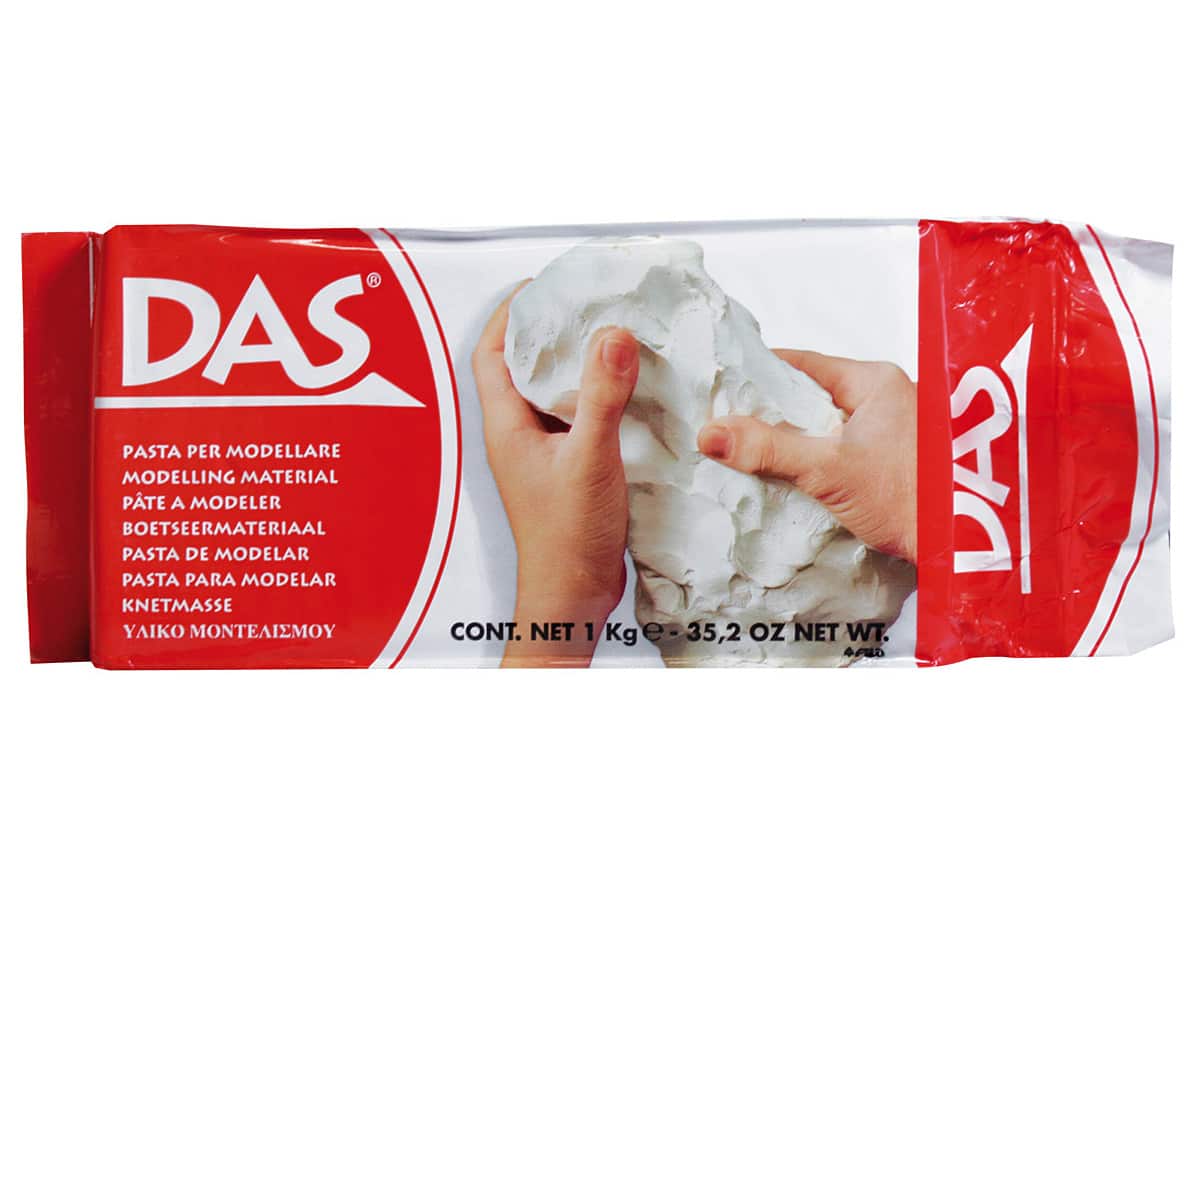 Clay Modeling Air Dry Brown 5.3 Oz Resealable Bag DAS 150g NEW 